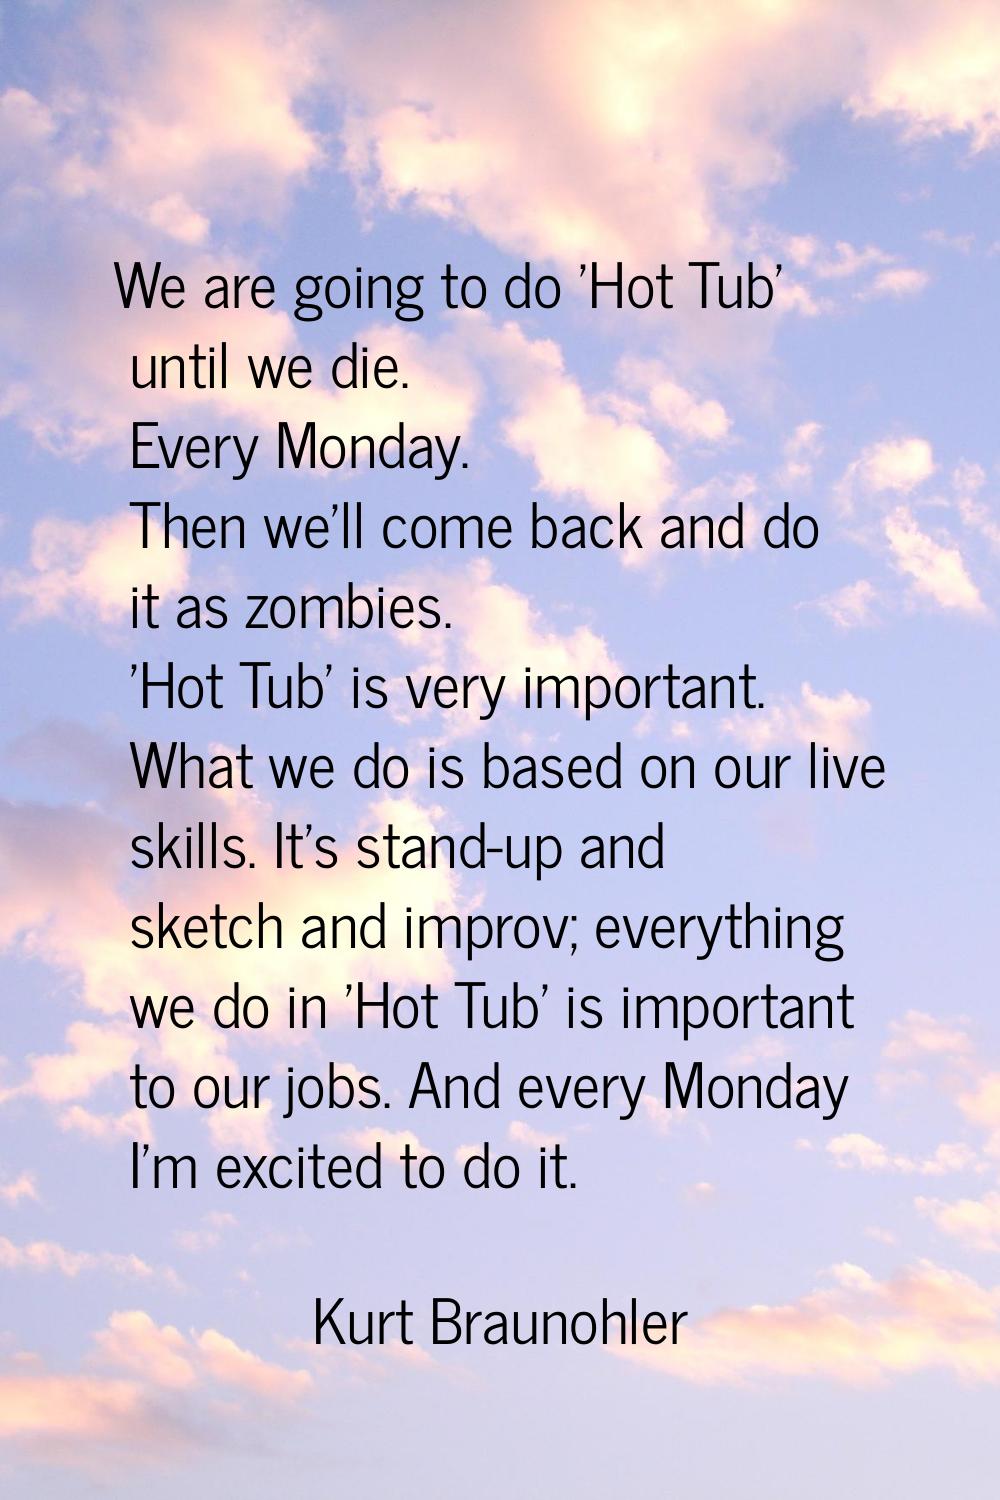 We are going to do 'Hot Tub' until we die. Every Monday. Then we'll come back and do it as zombies.